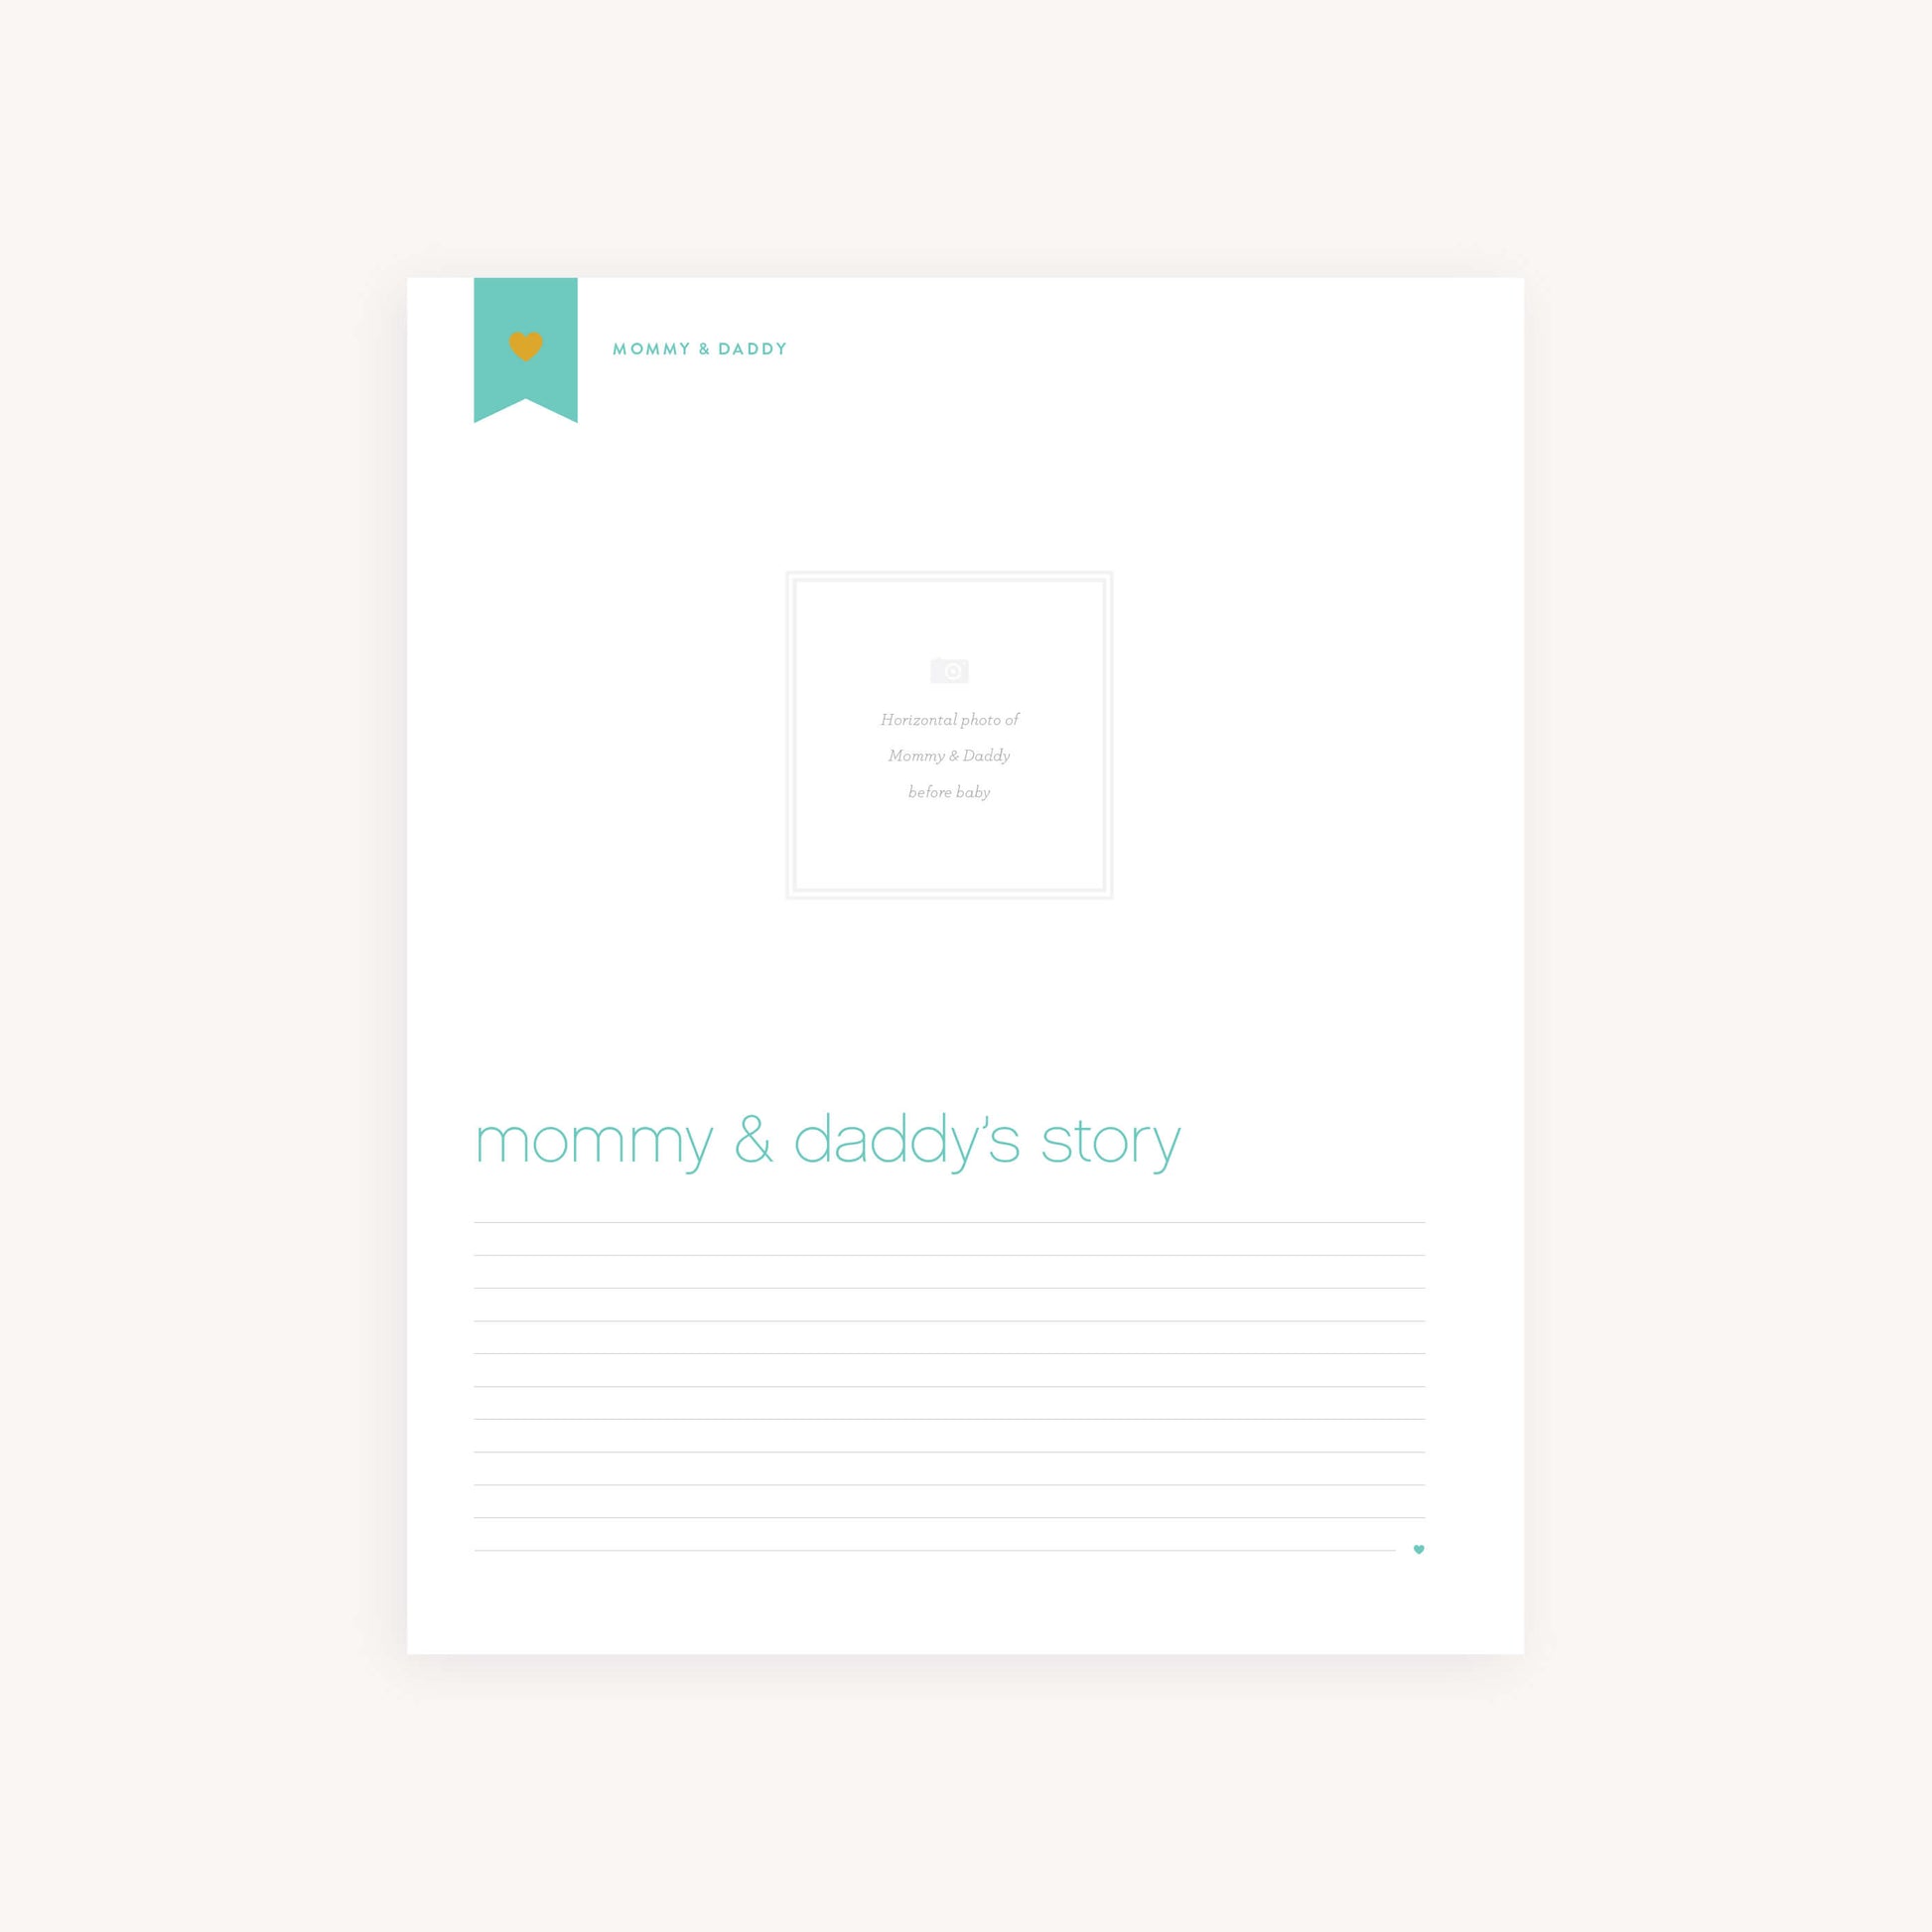 MOMMY & DADDY'S STORY